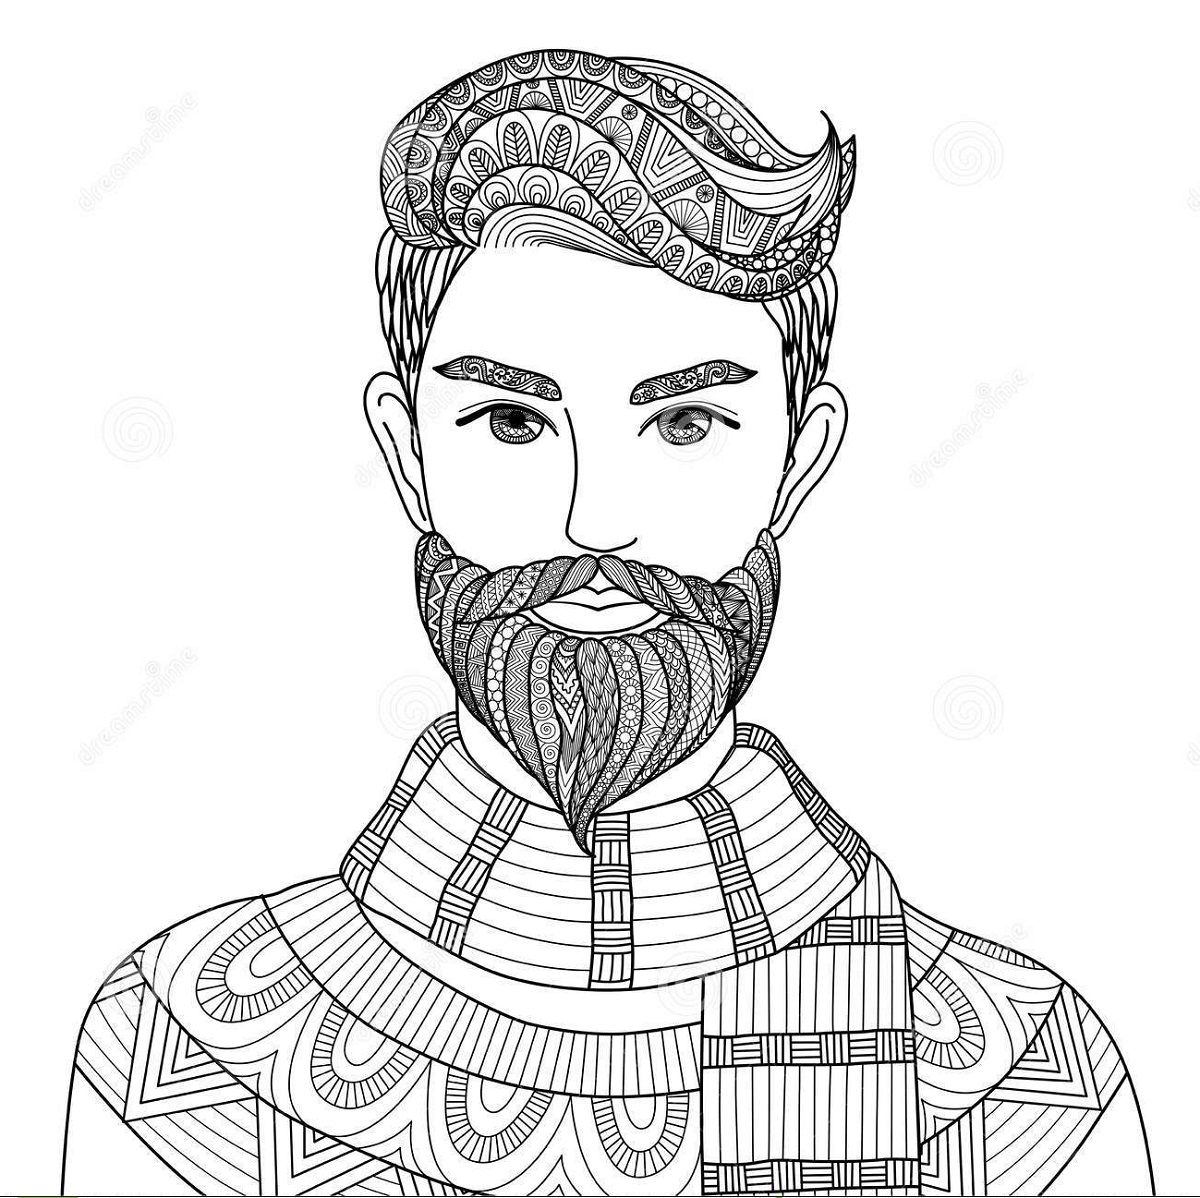 hipster coloring pages doodle